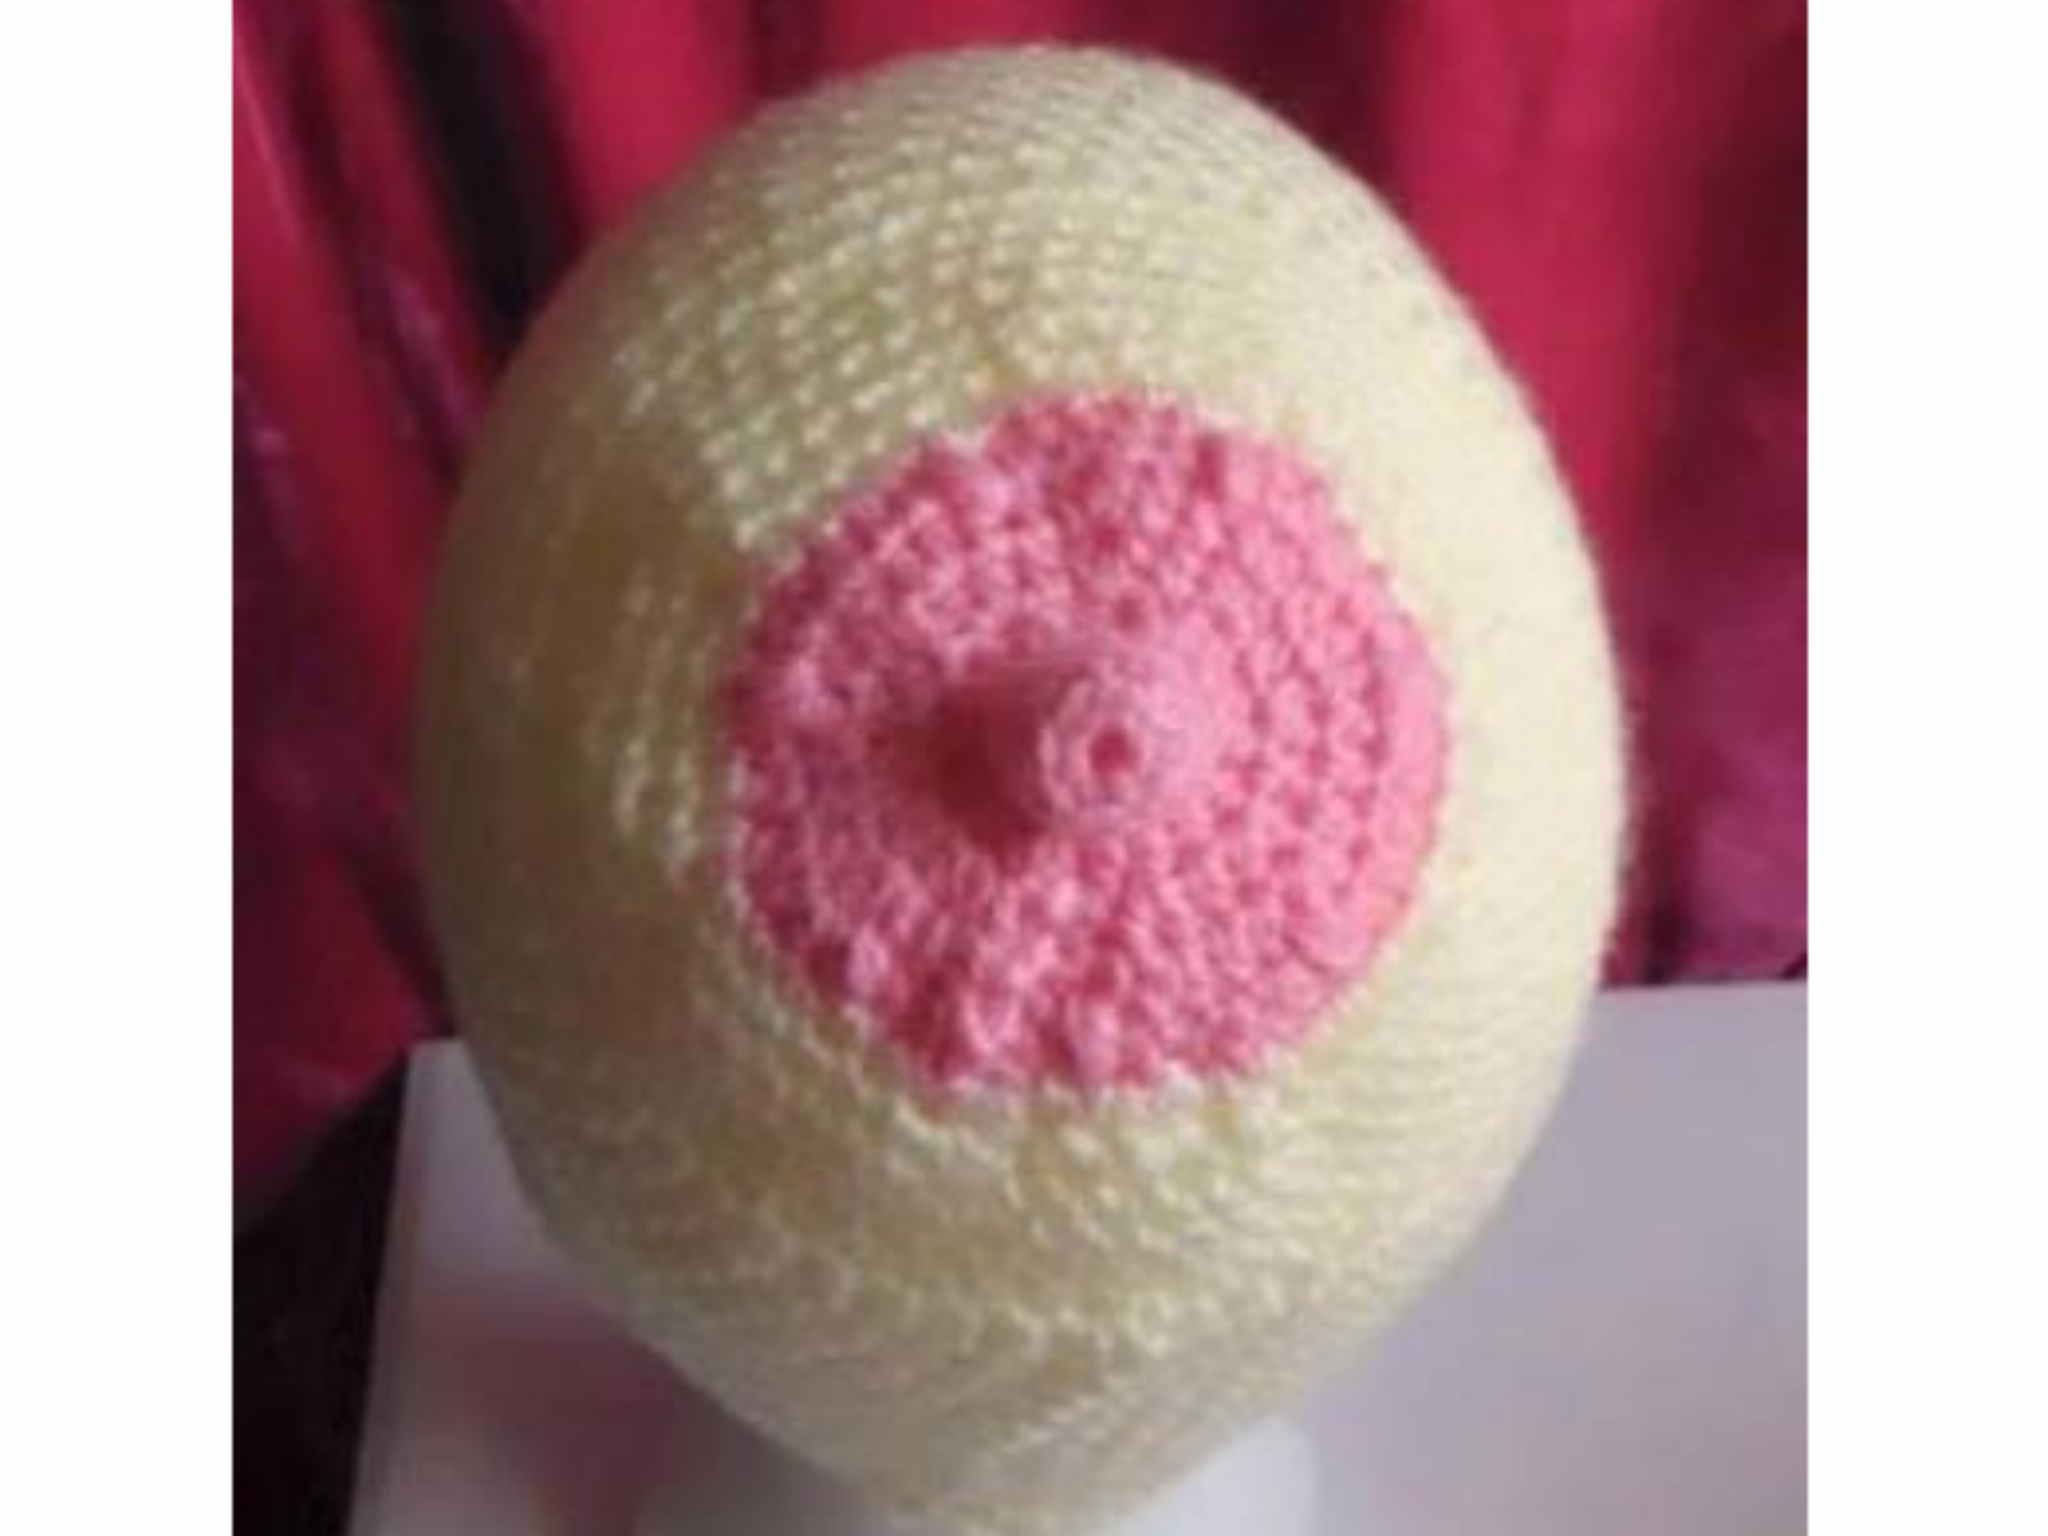 People have been knitting and buying 'booby cakes' in support of breast cancer sufferer